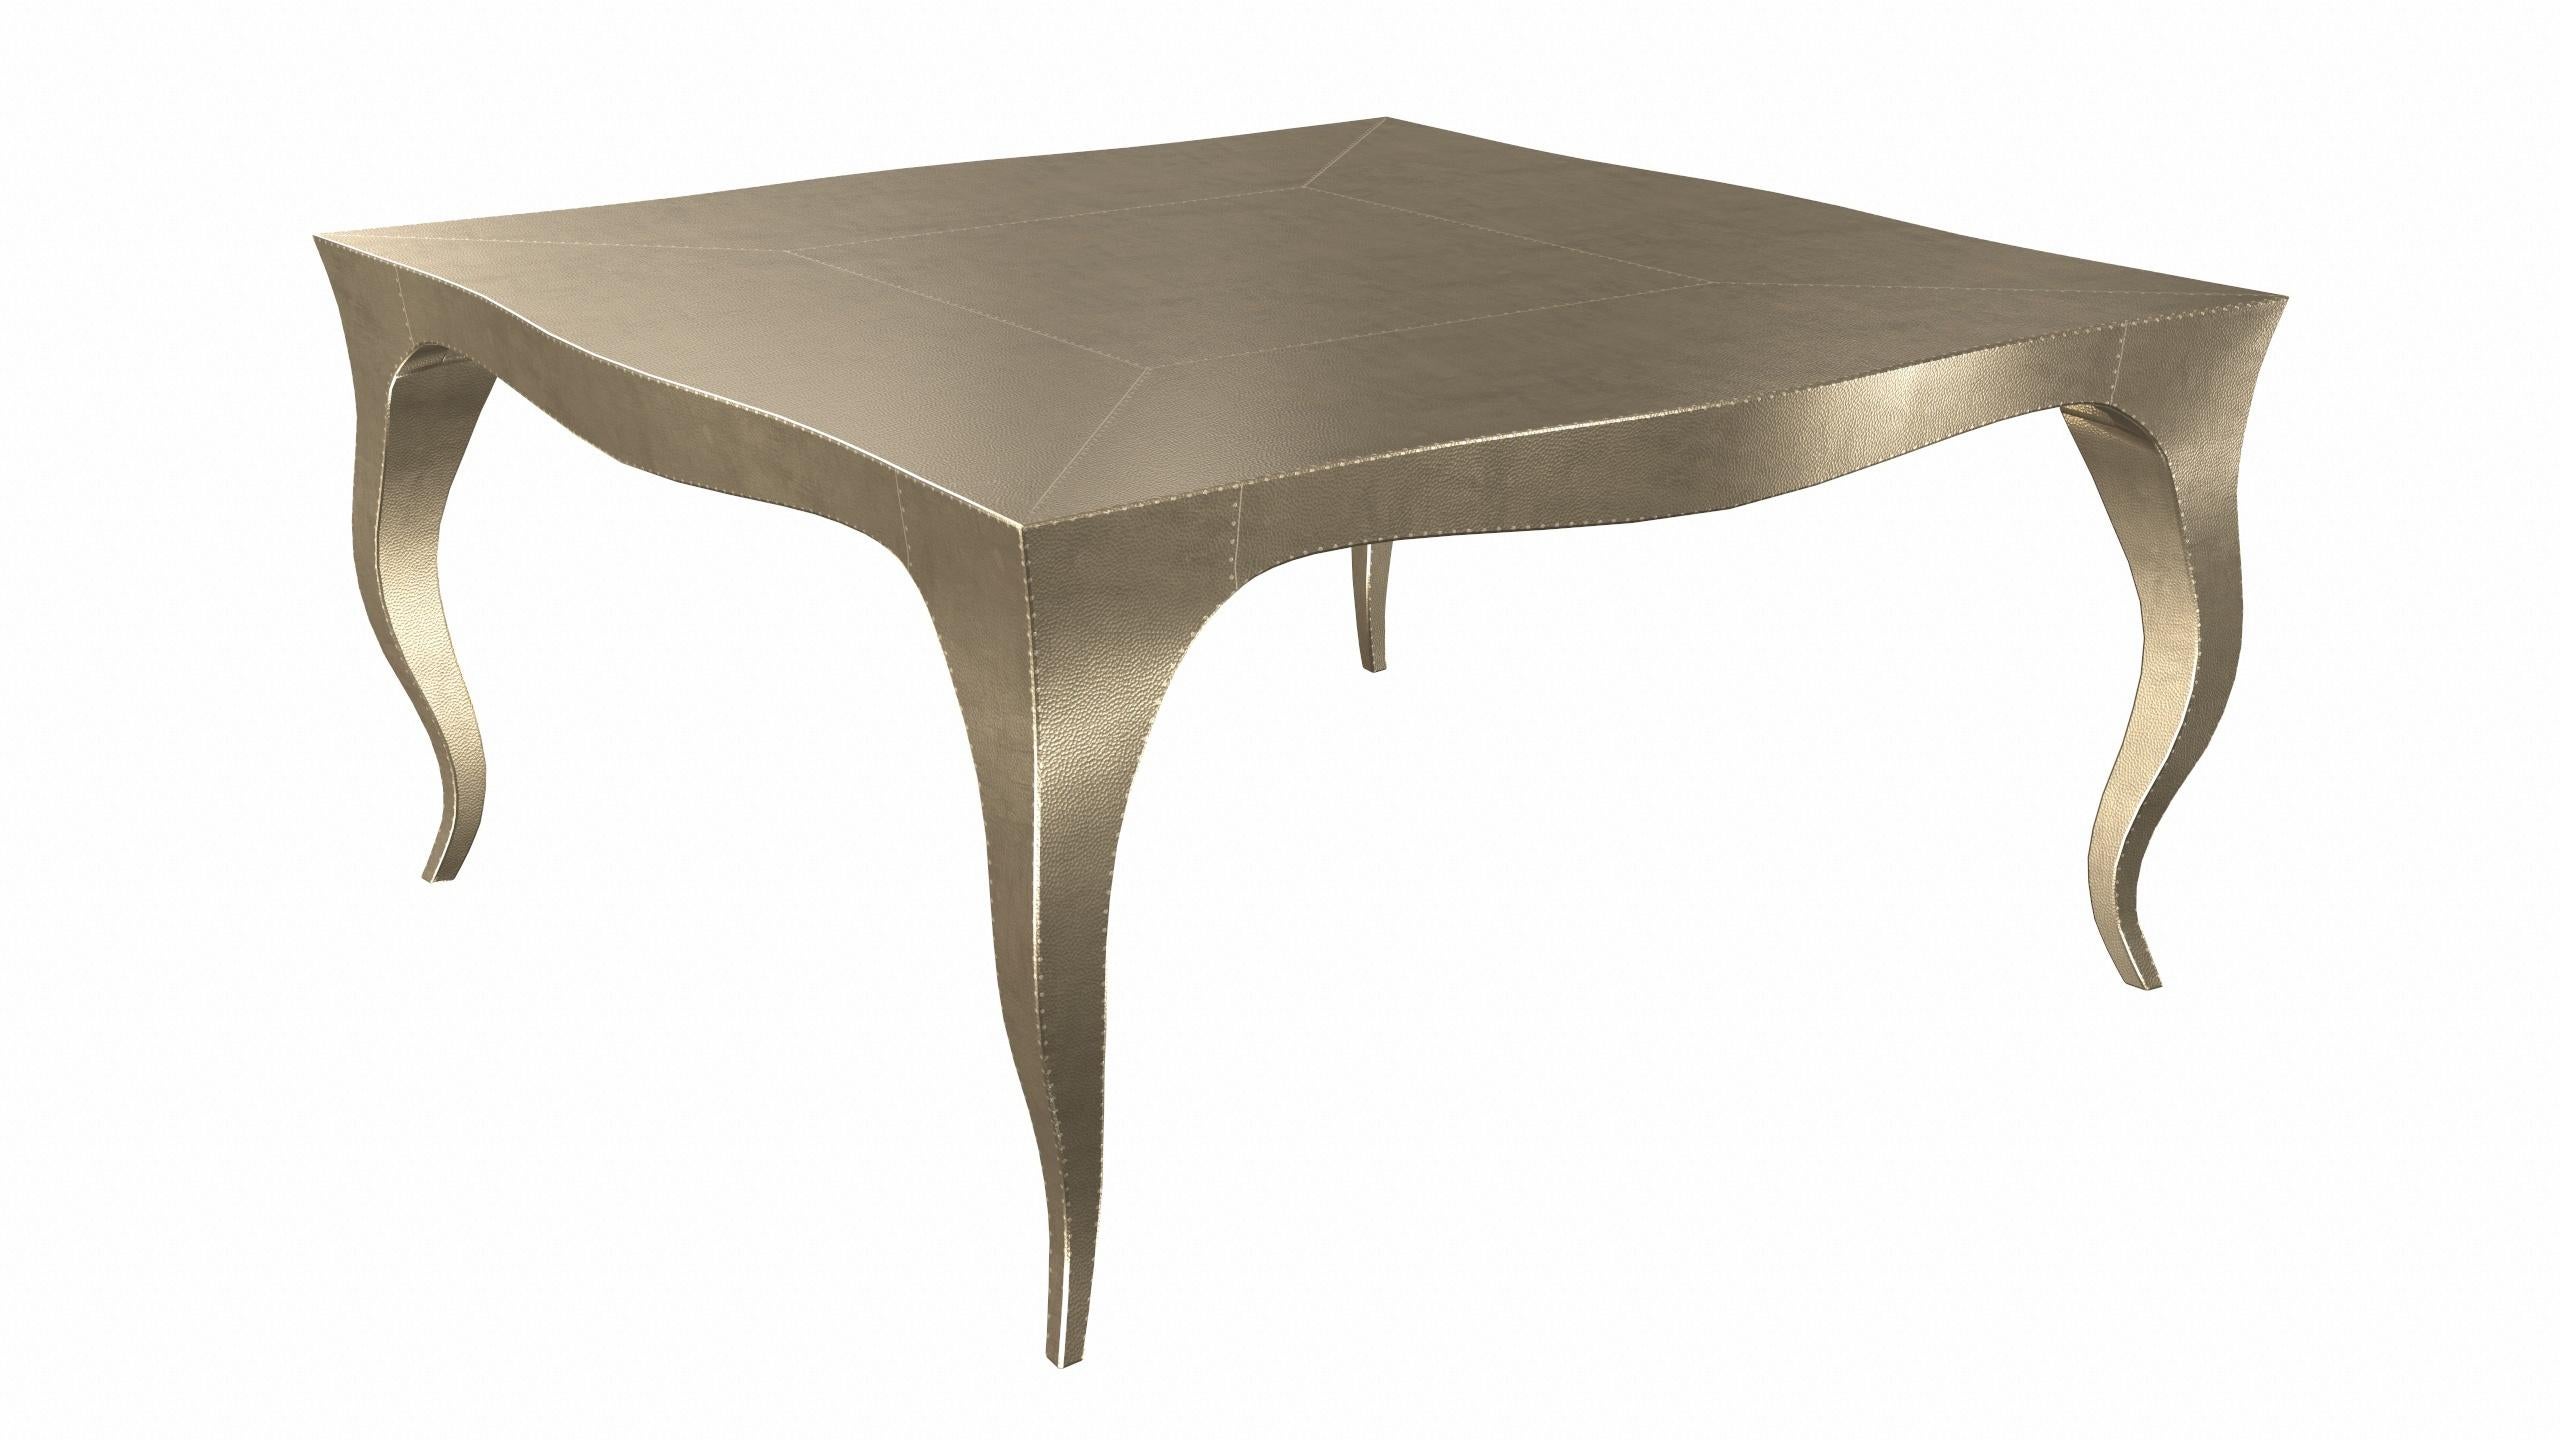 Contemporary Louise Art Deco Industrial and Work Tables Mid. Hammered Brass 18.5x18.5x10 inch For Sale